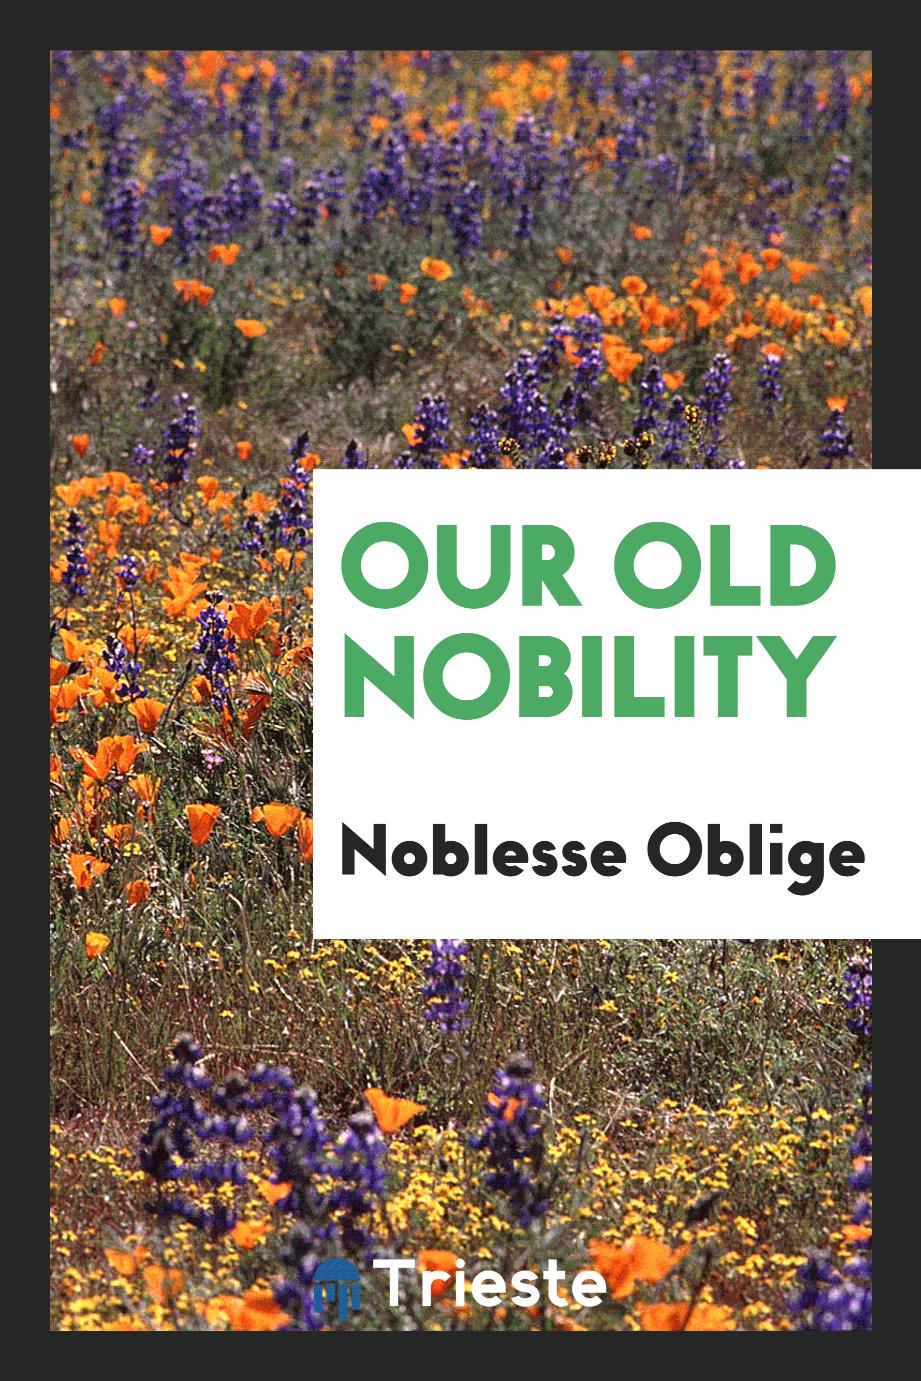 Our old nobility